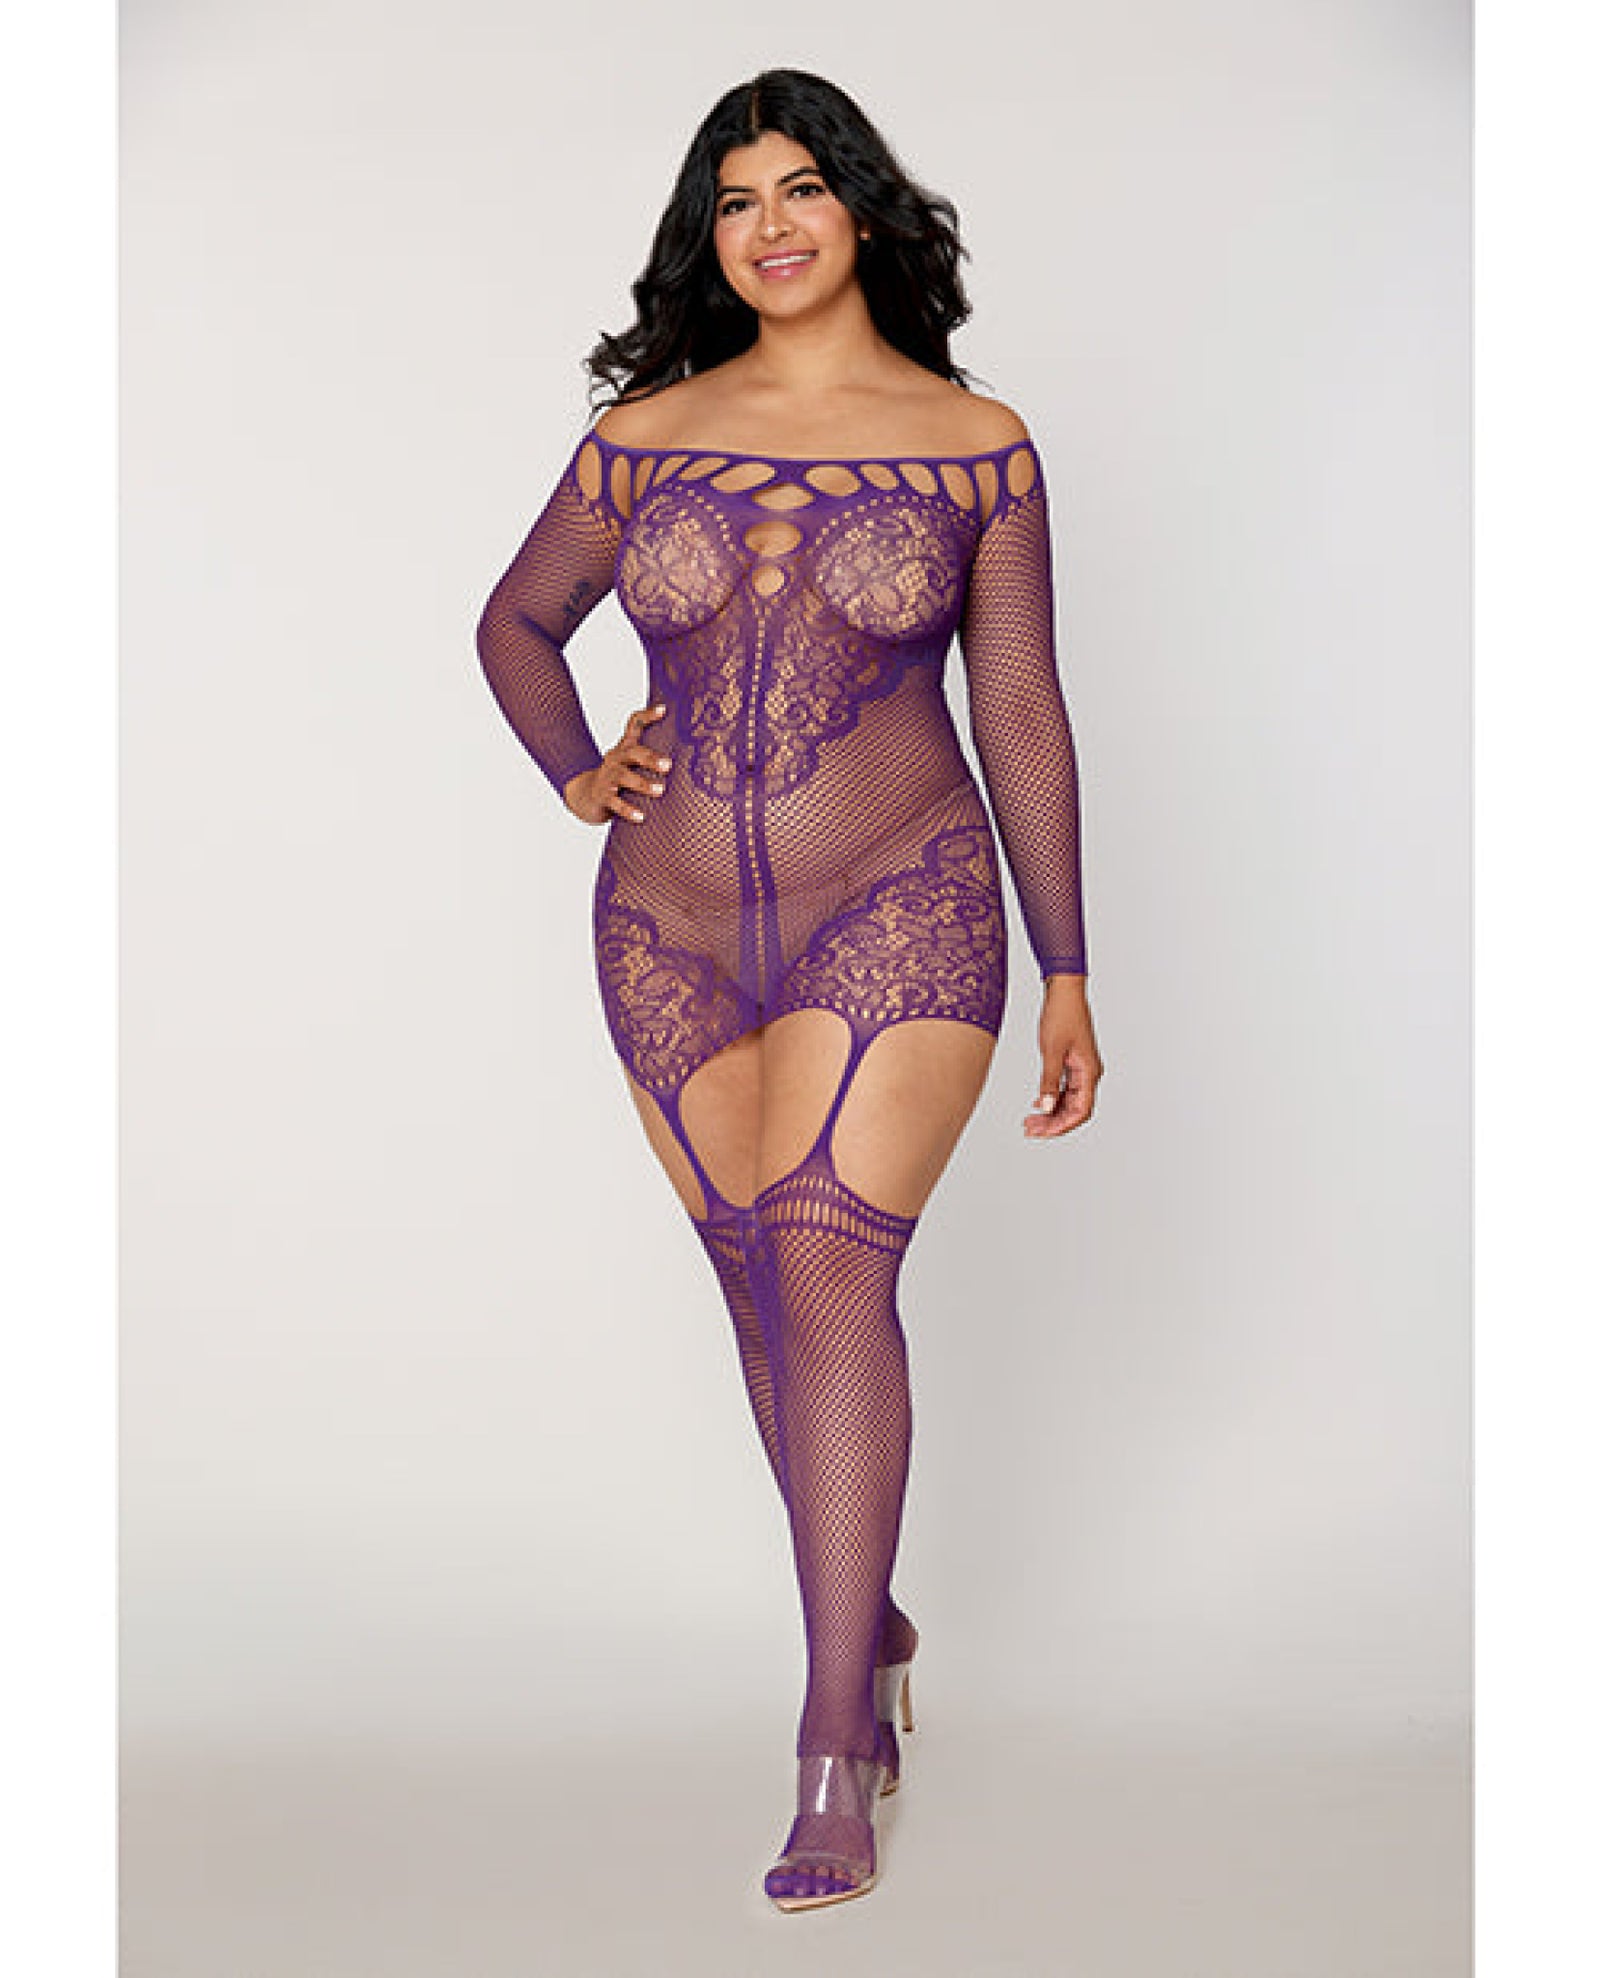 Scalloped Lace and Fishnet Garter Dress w/Attached Stockings - Purple QN Dreamgirl International